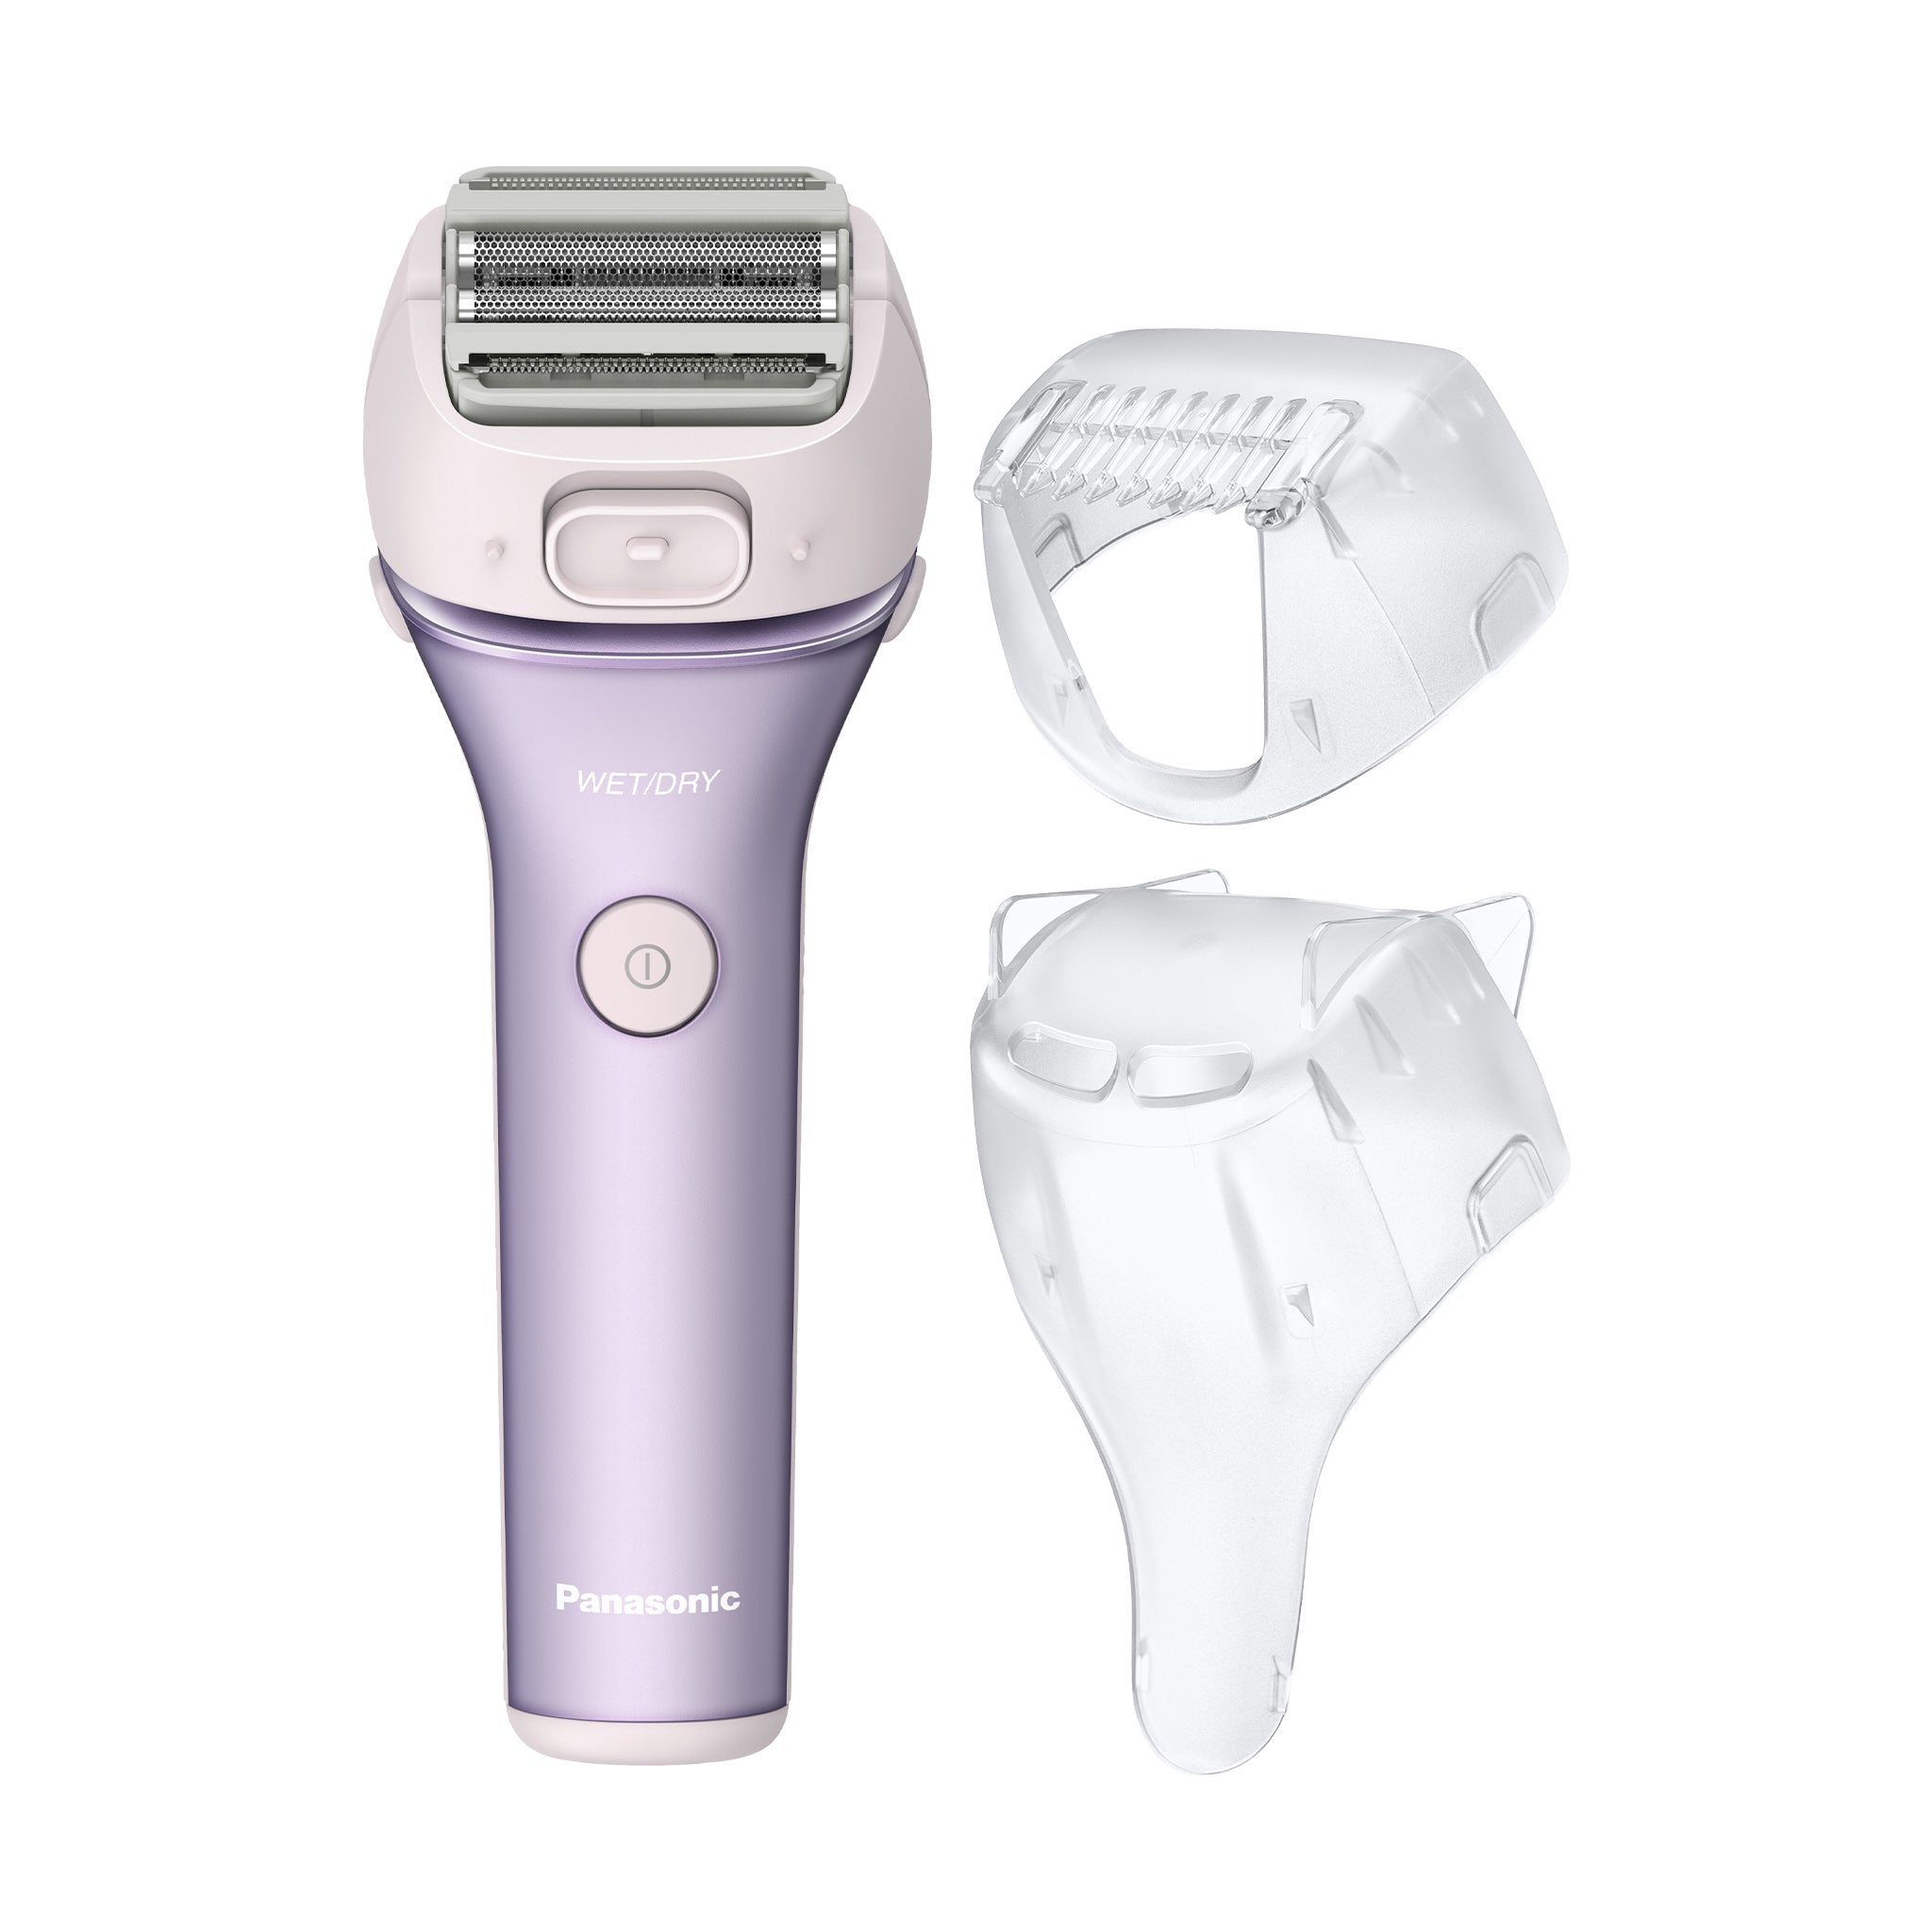 Panasonic 4-Blade Women's Electric Shaver with Pop-Up Trimmer and